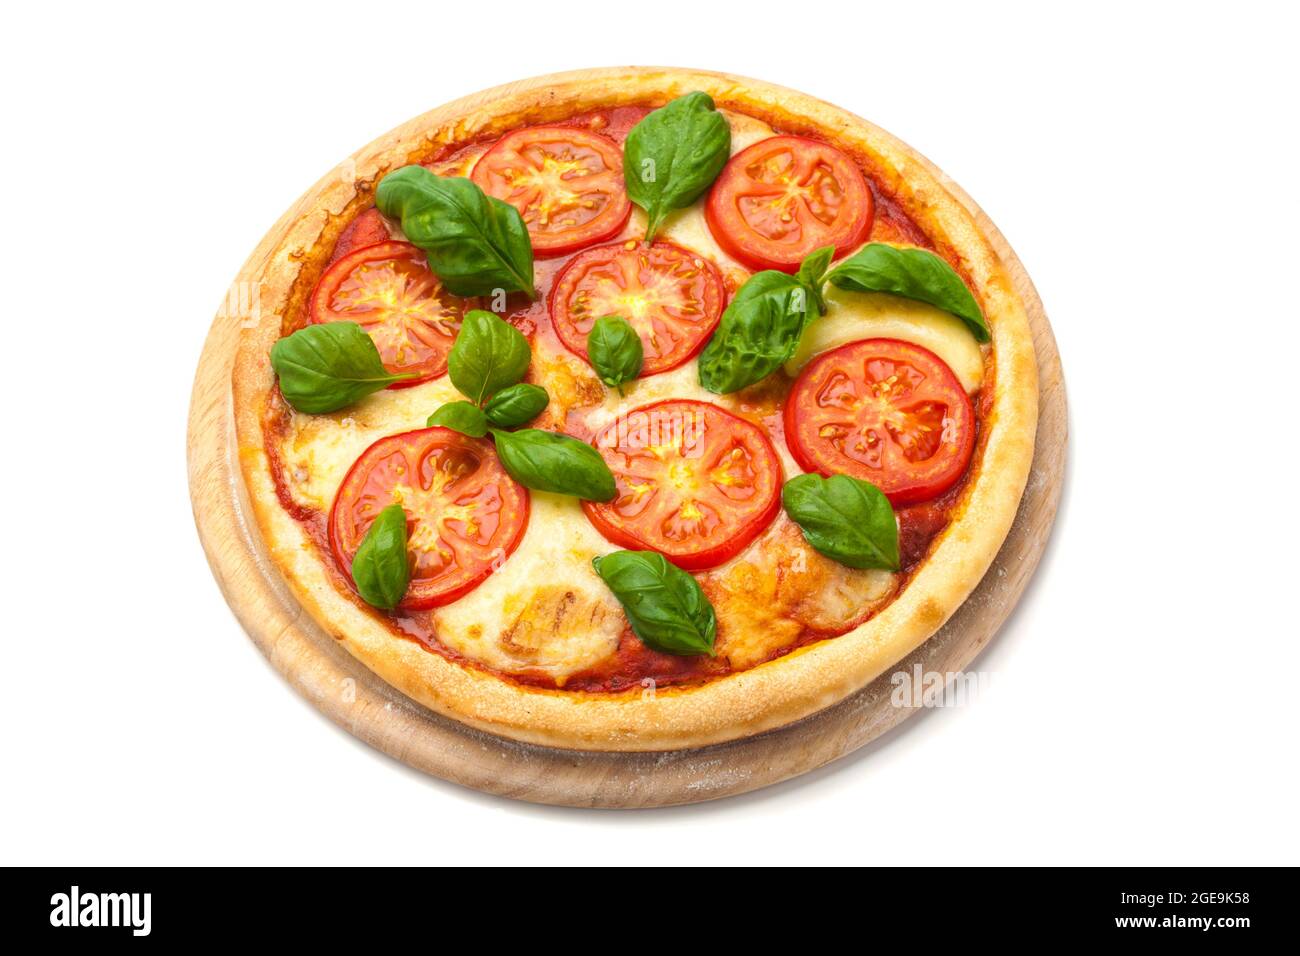 Pizza Margherita with tomato slices, mozzarella cheese and fresh basil leaves on wooden platter isolated on white background Stock Photo